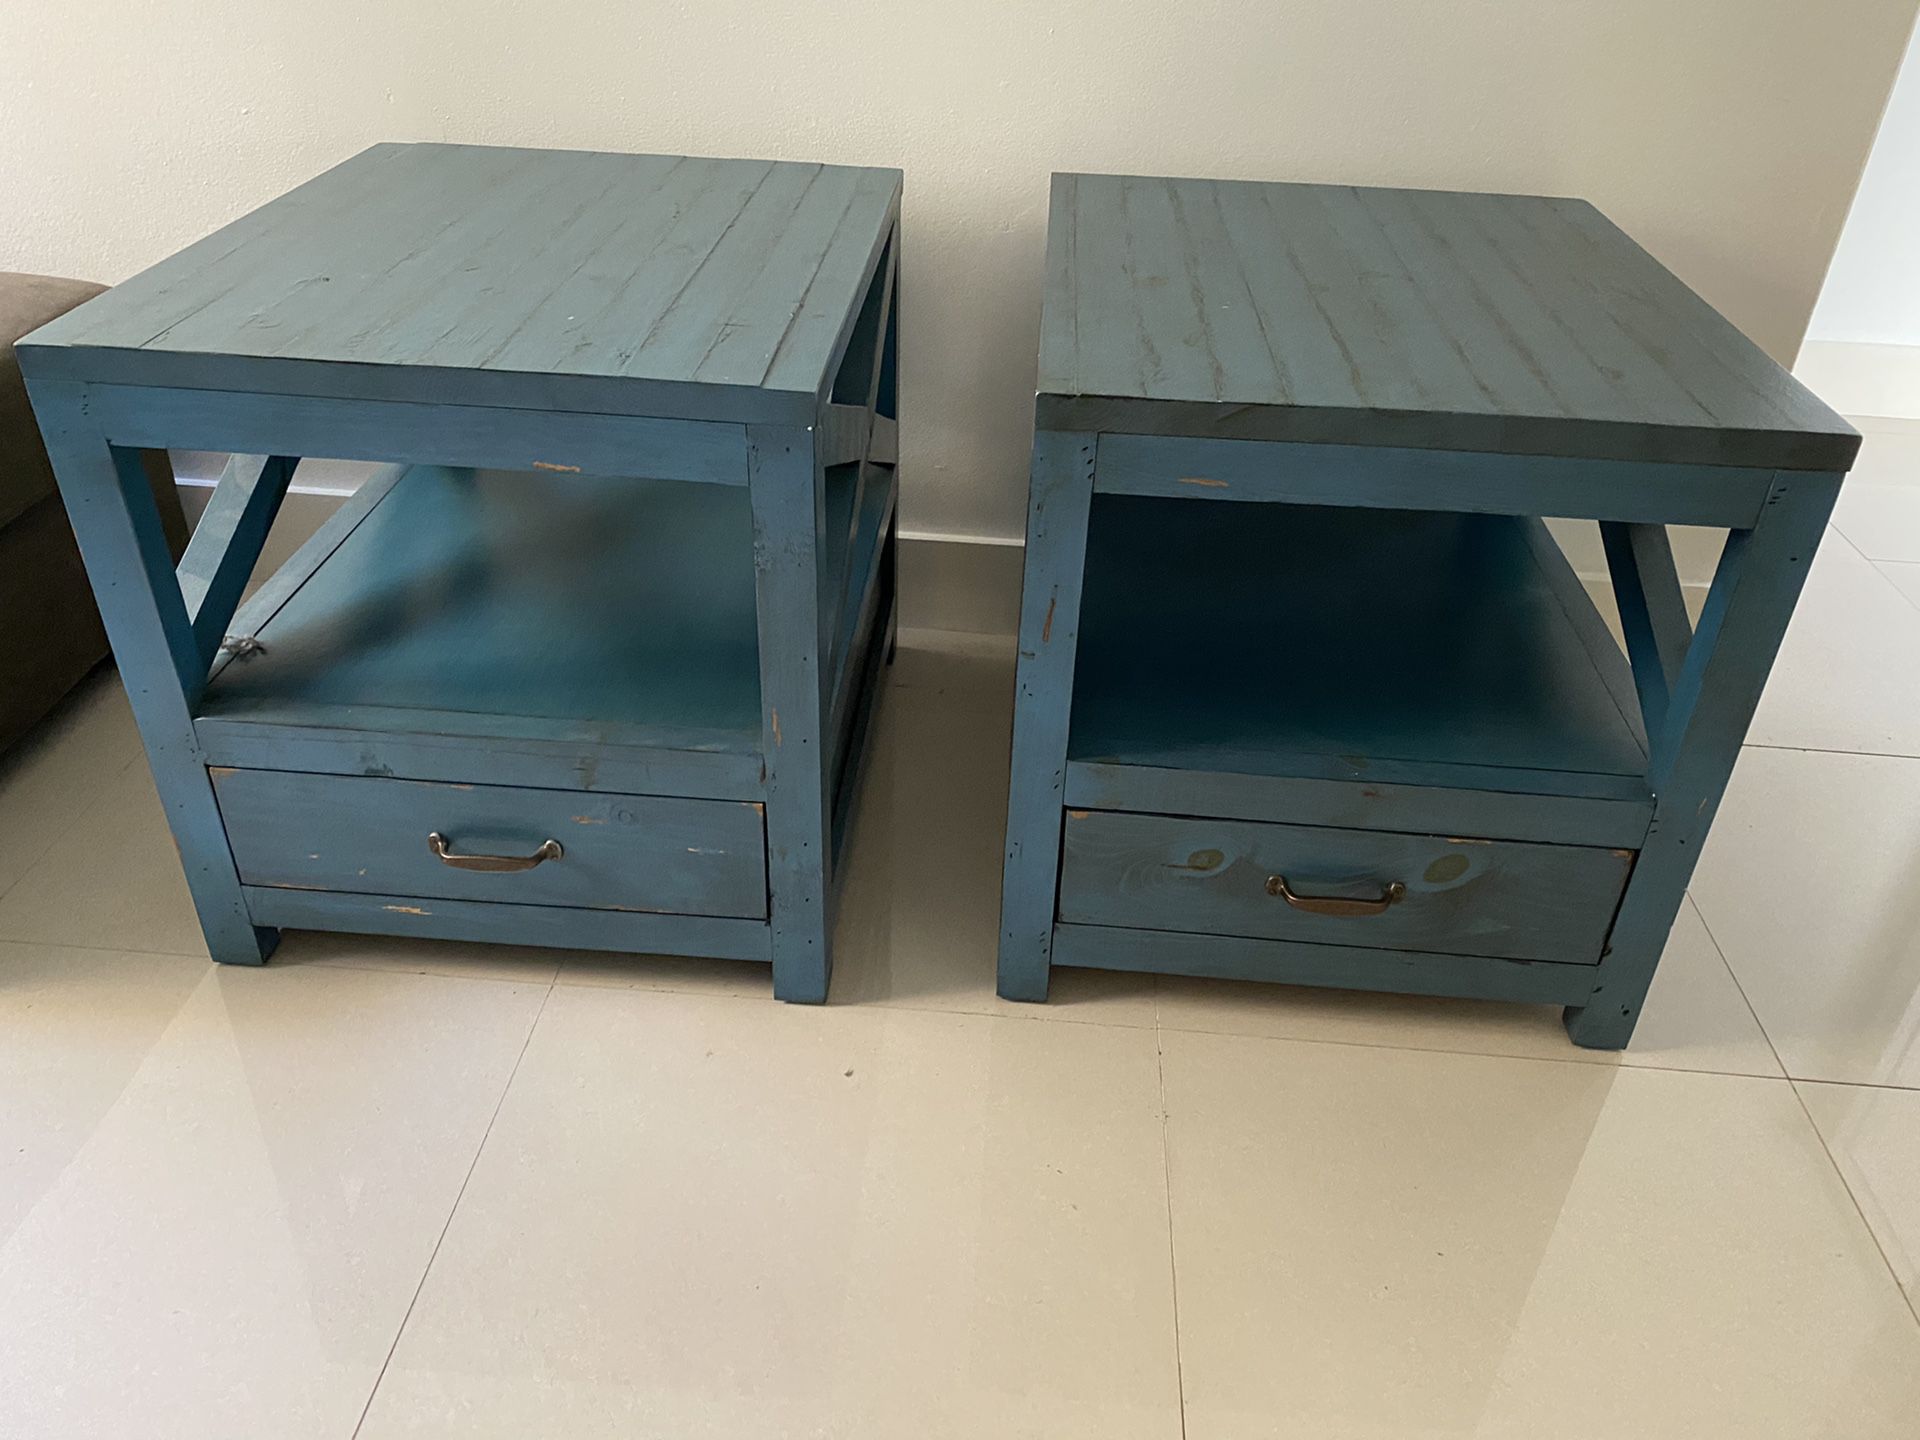 Two Wooden Teal Blue couch end tables from Rooms To Go. PERFECT CONDITION!